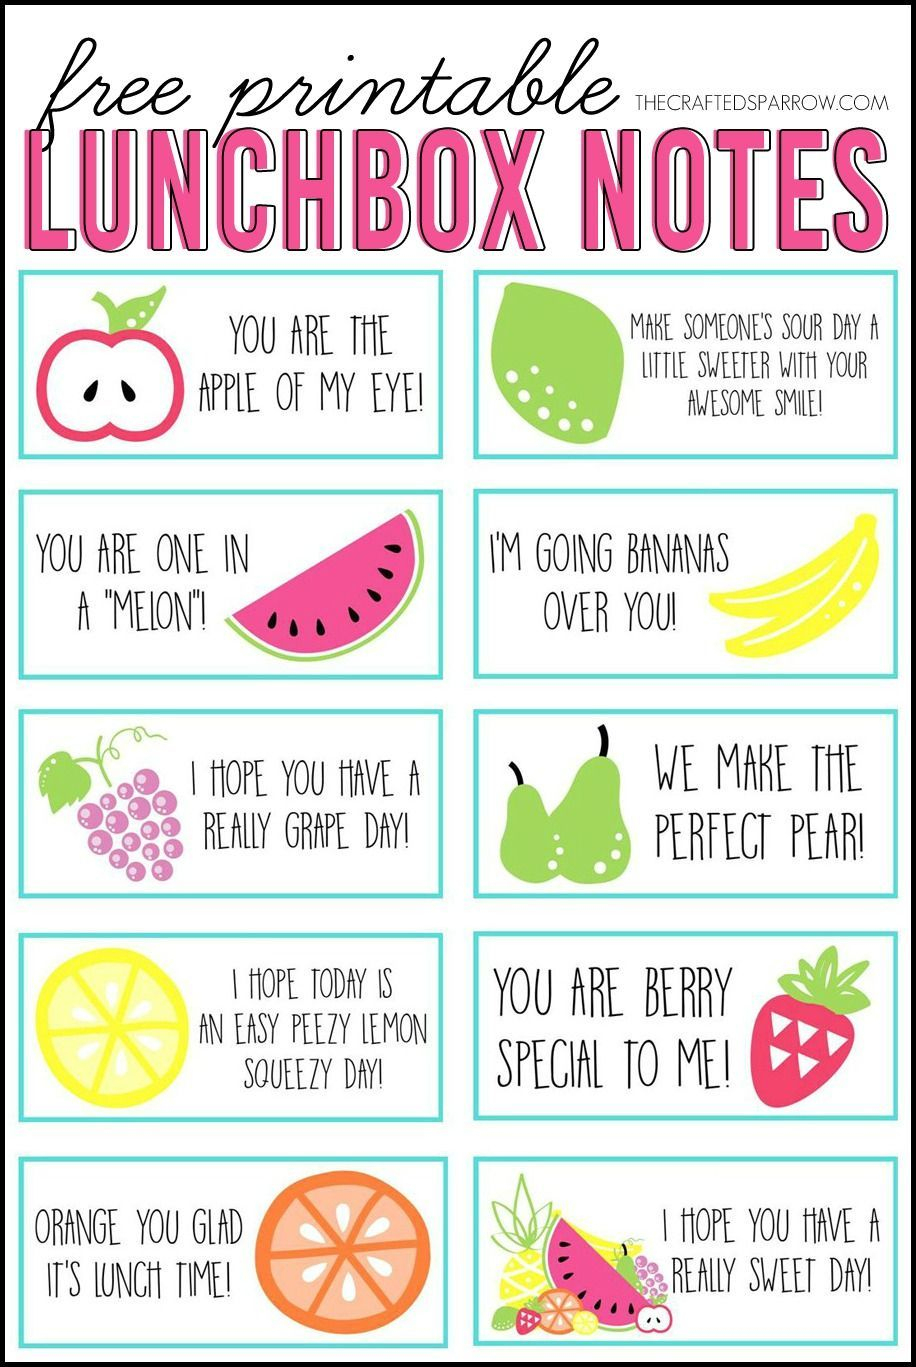 Free Printable Lunchbox Notes, 3 Full Pages To Print - Free Printable Lunchbox Notes